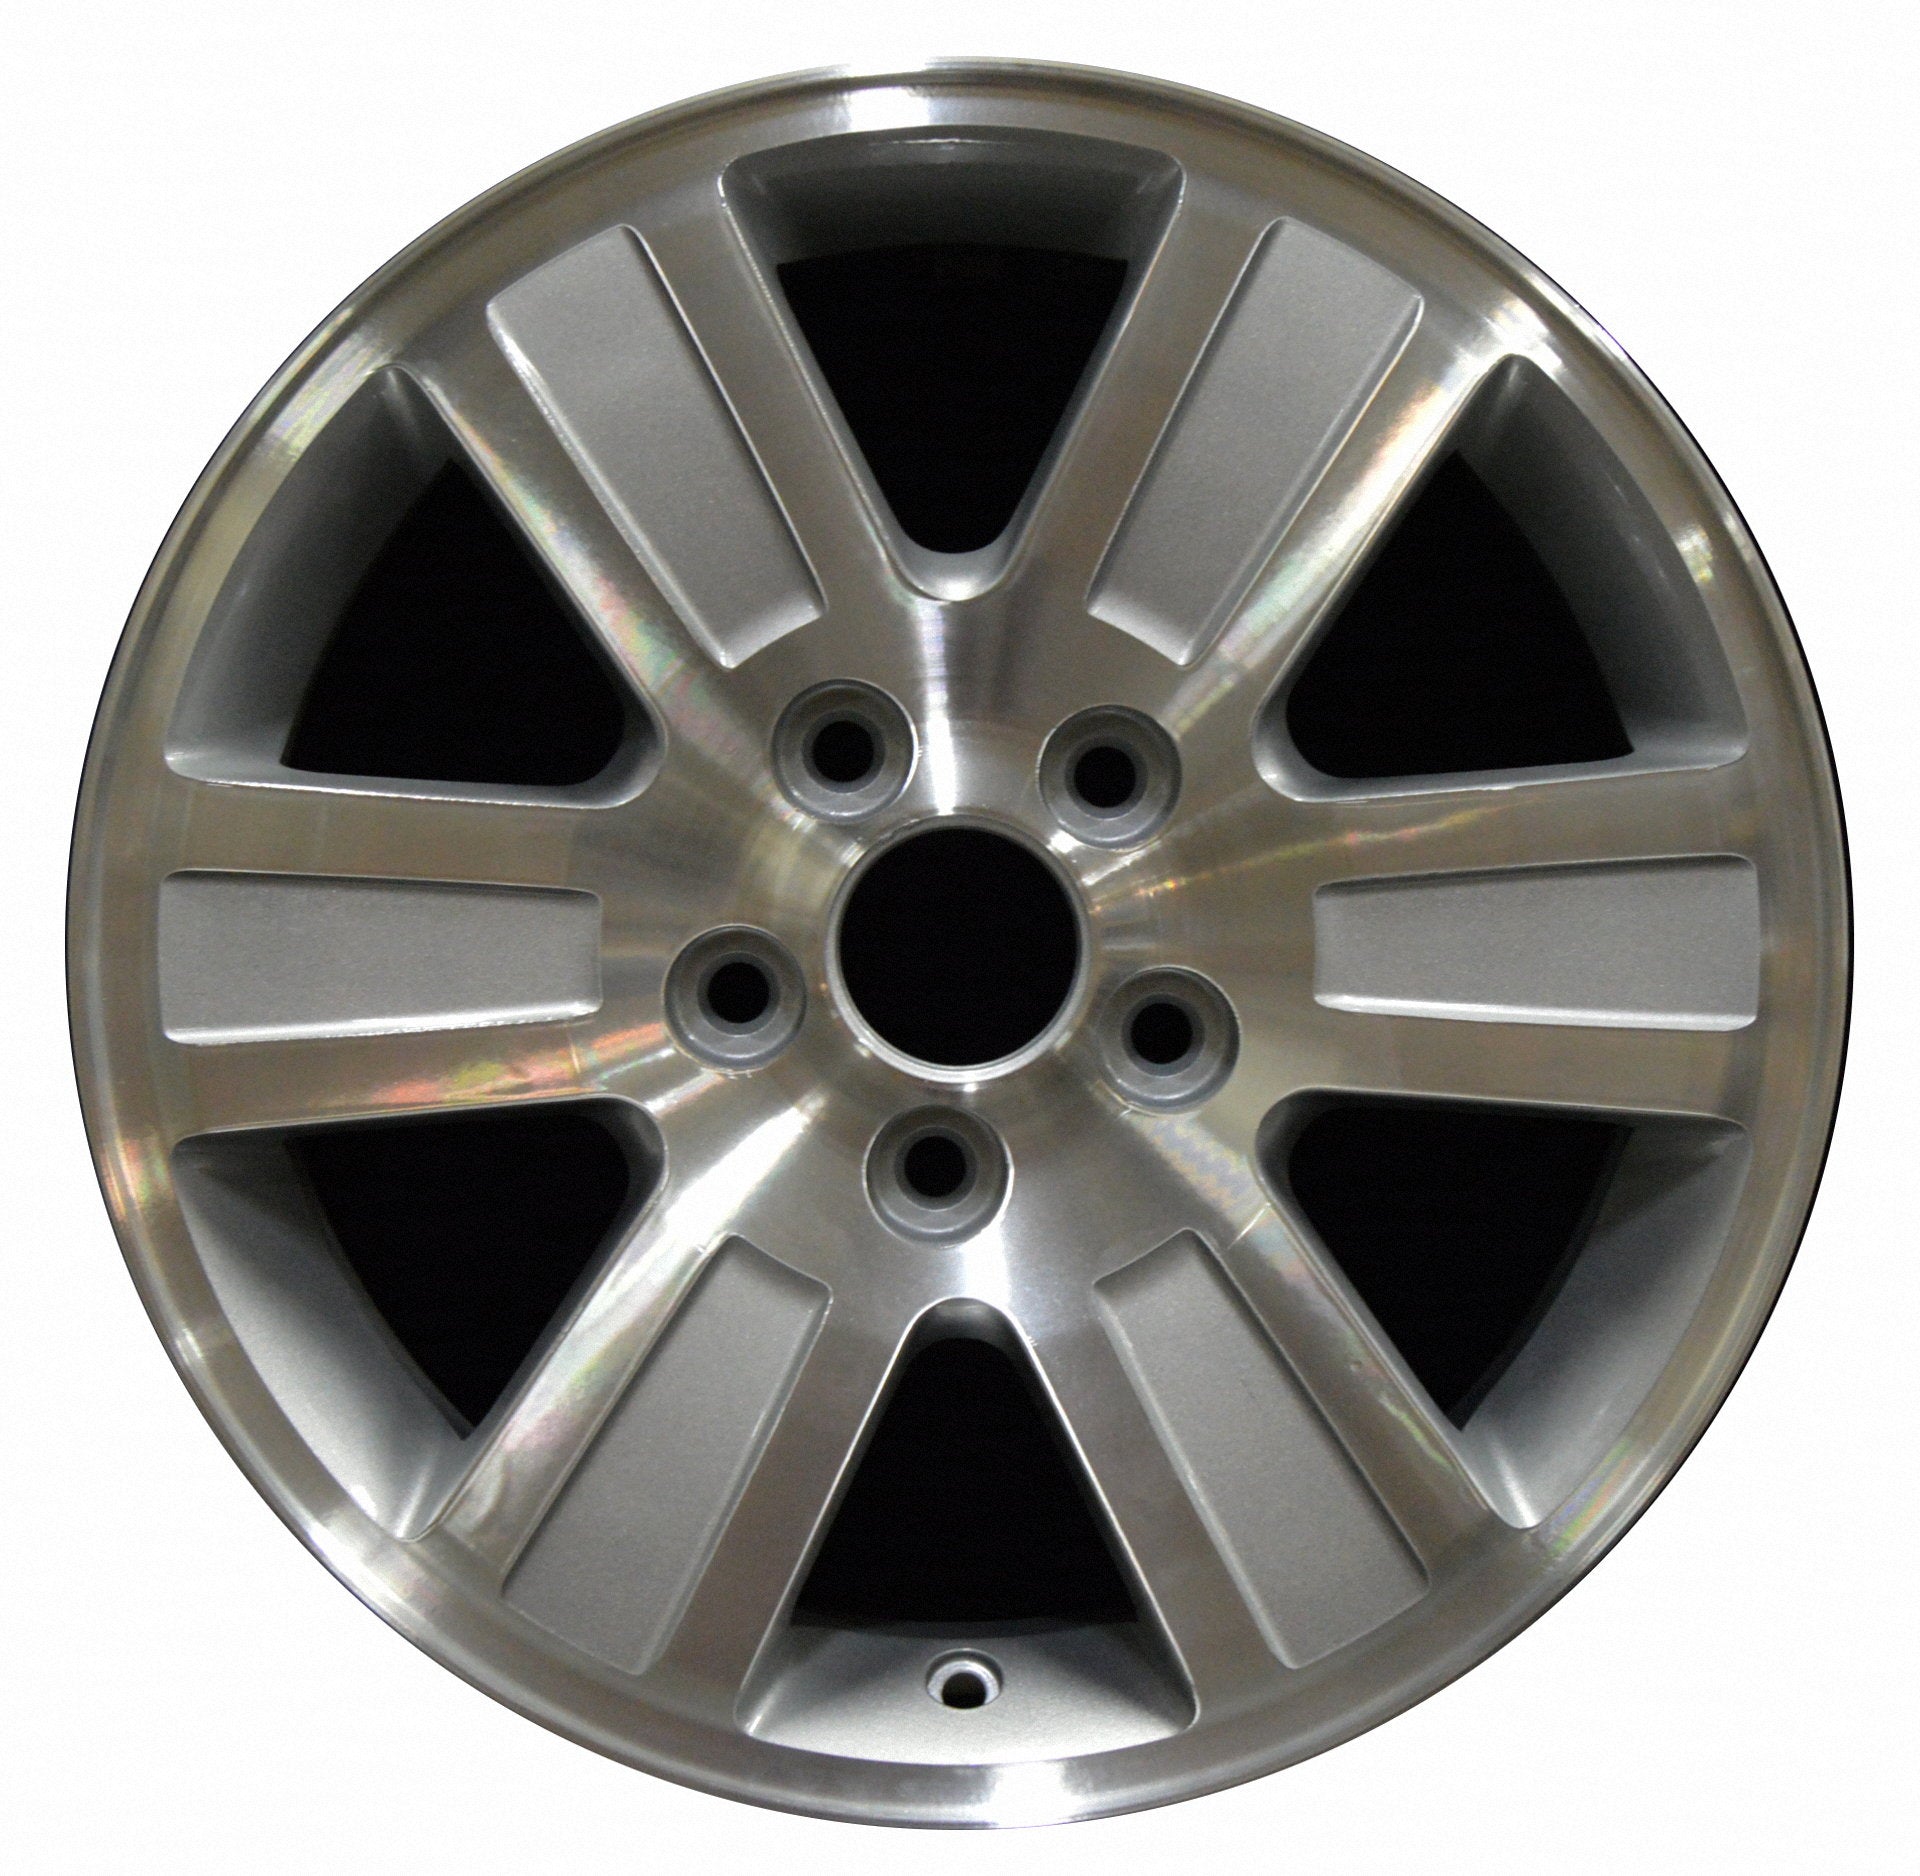 Ford Explorer  2006, 2007, 2008, 2009, 2010 Factory OEM Car Wheel Size 16x7 Alloy WAO.3638.PS01.MA